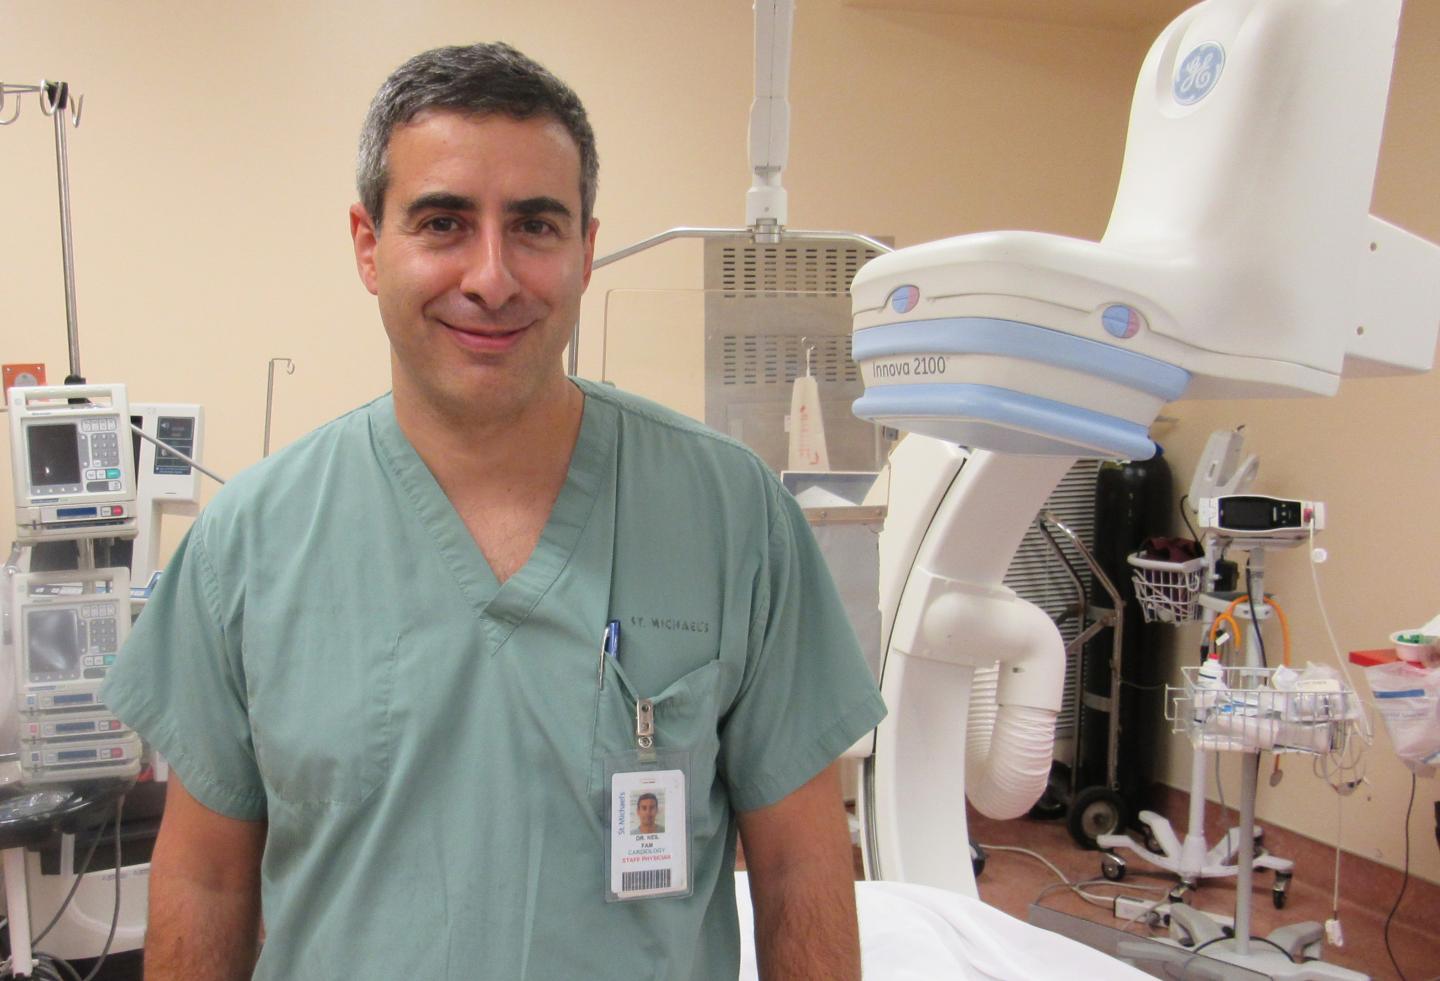 Canadian Cardiologist Performs Successful World First, Using Canadian Invented Device in Novel Way